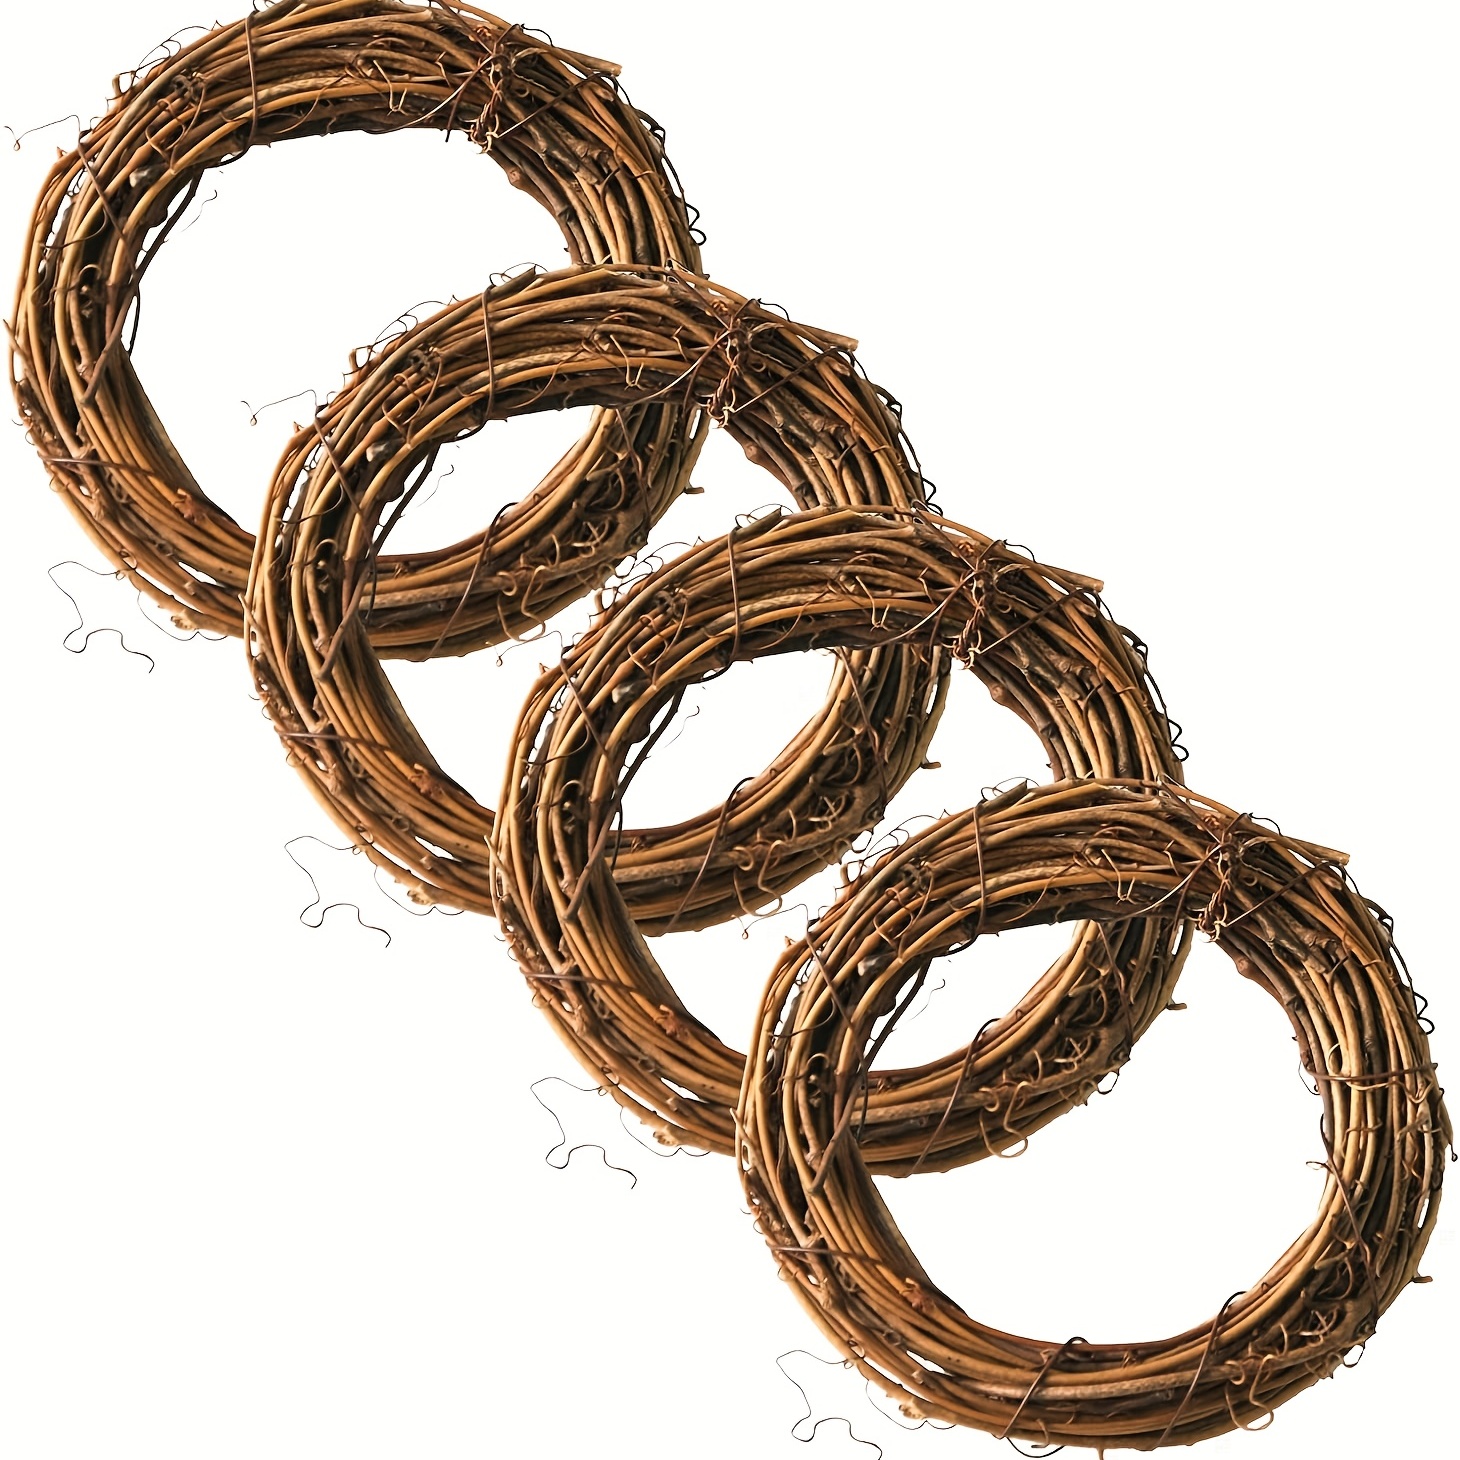 Chaokui 20 Inch Rattan Heart Wreath Super Large Grapevine Branch Wreath for  DIY Crafts Front Door Garland Home Wedding Holiday Party Decor, 50cm